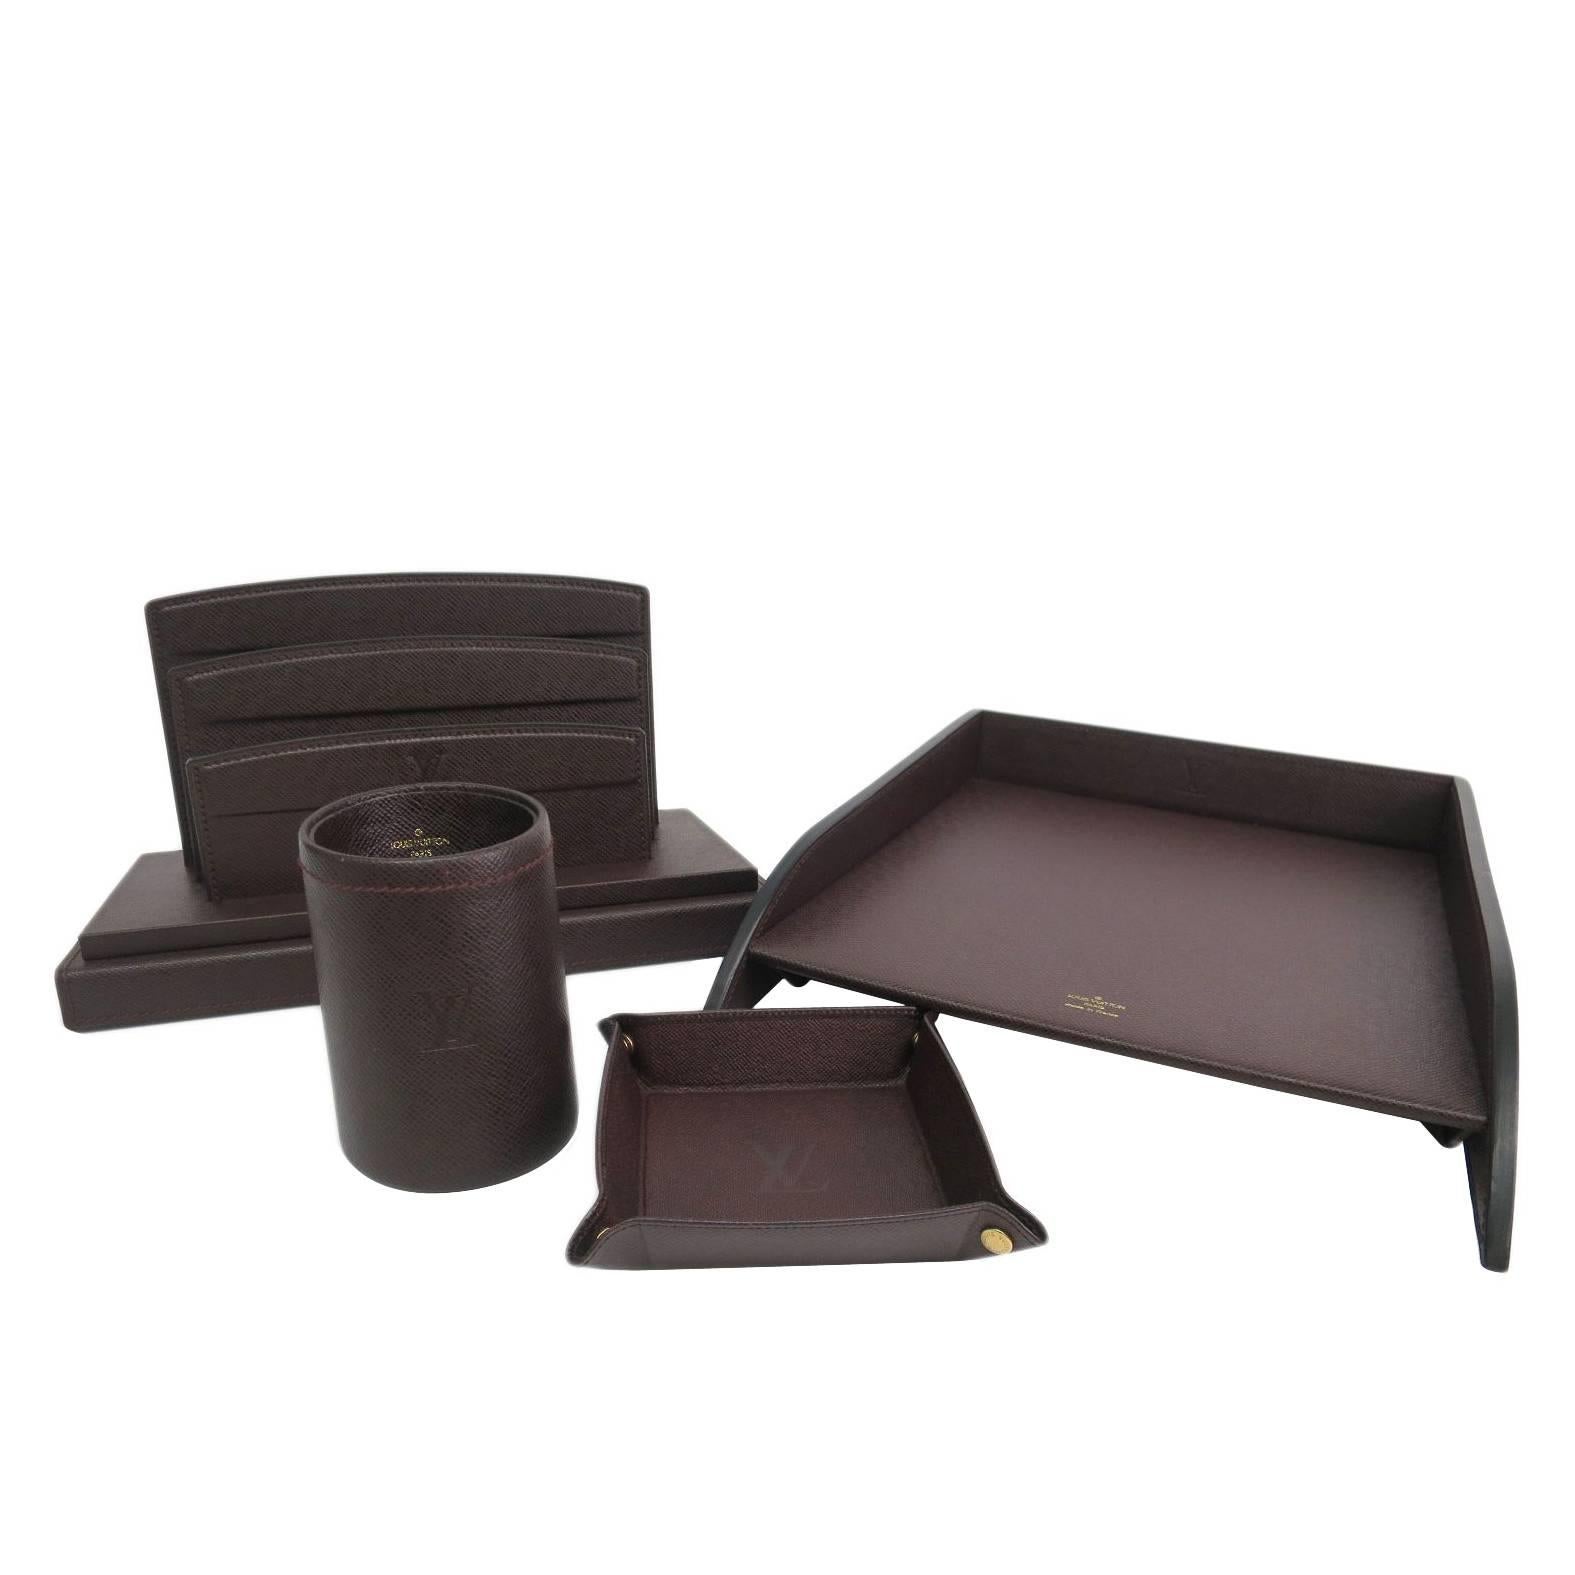 Louis Vuitton Four Piece Dark Brown Taiga Leather Desk Stationery Kit in Box